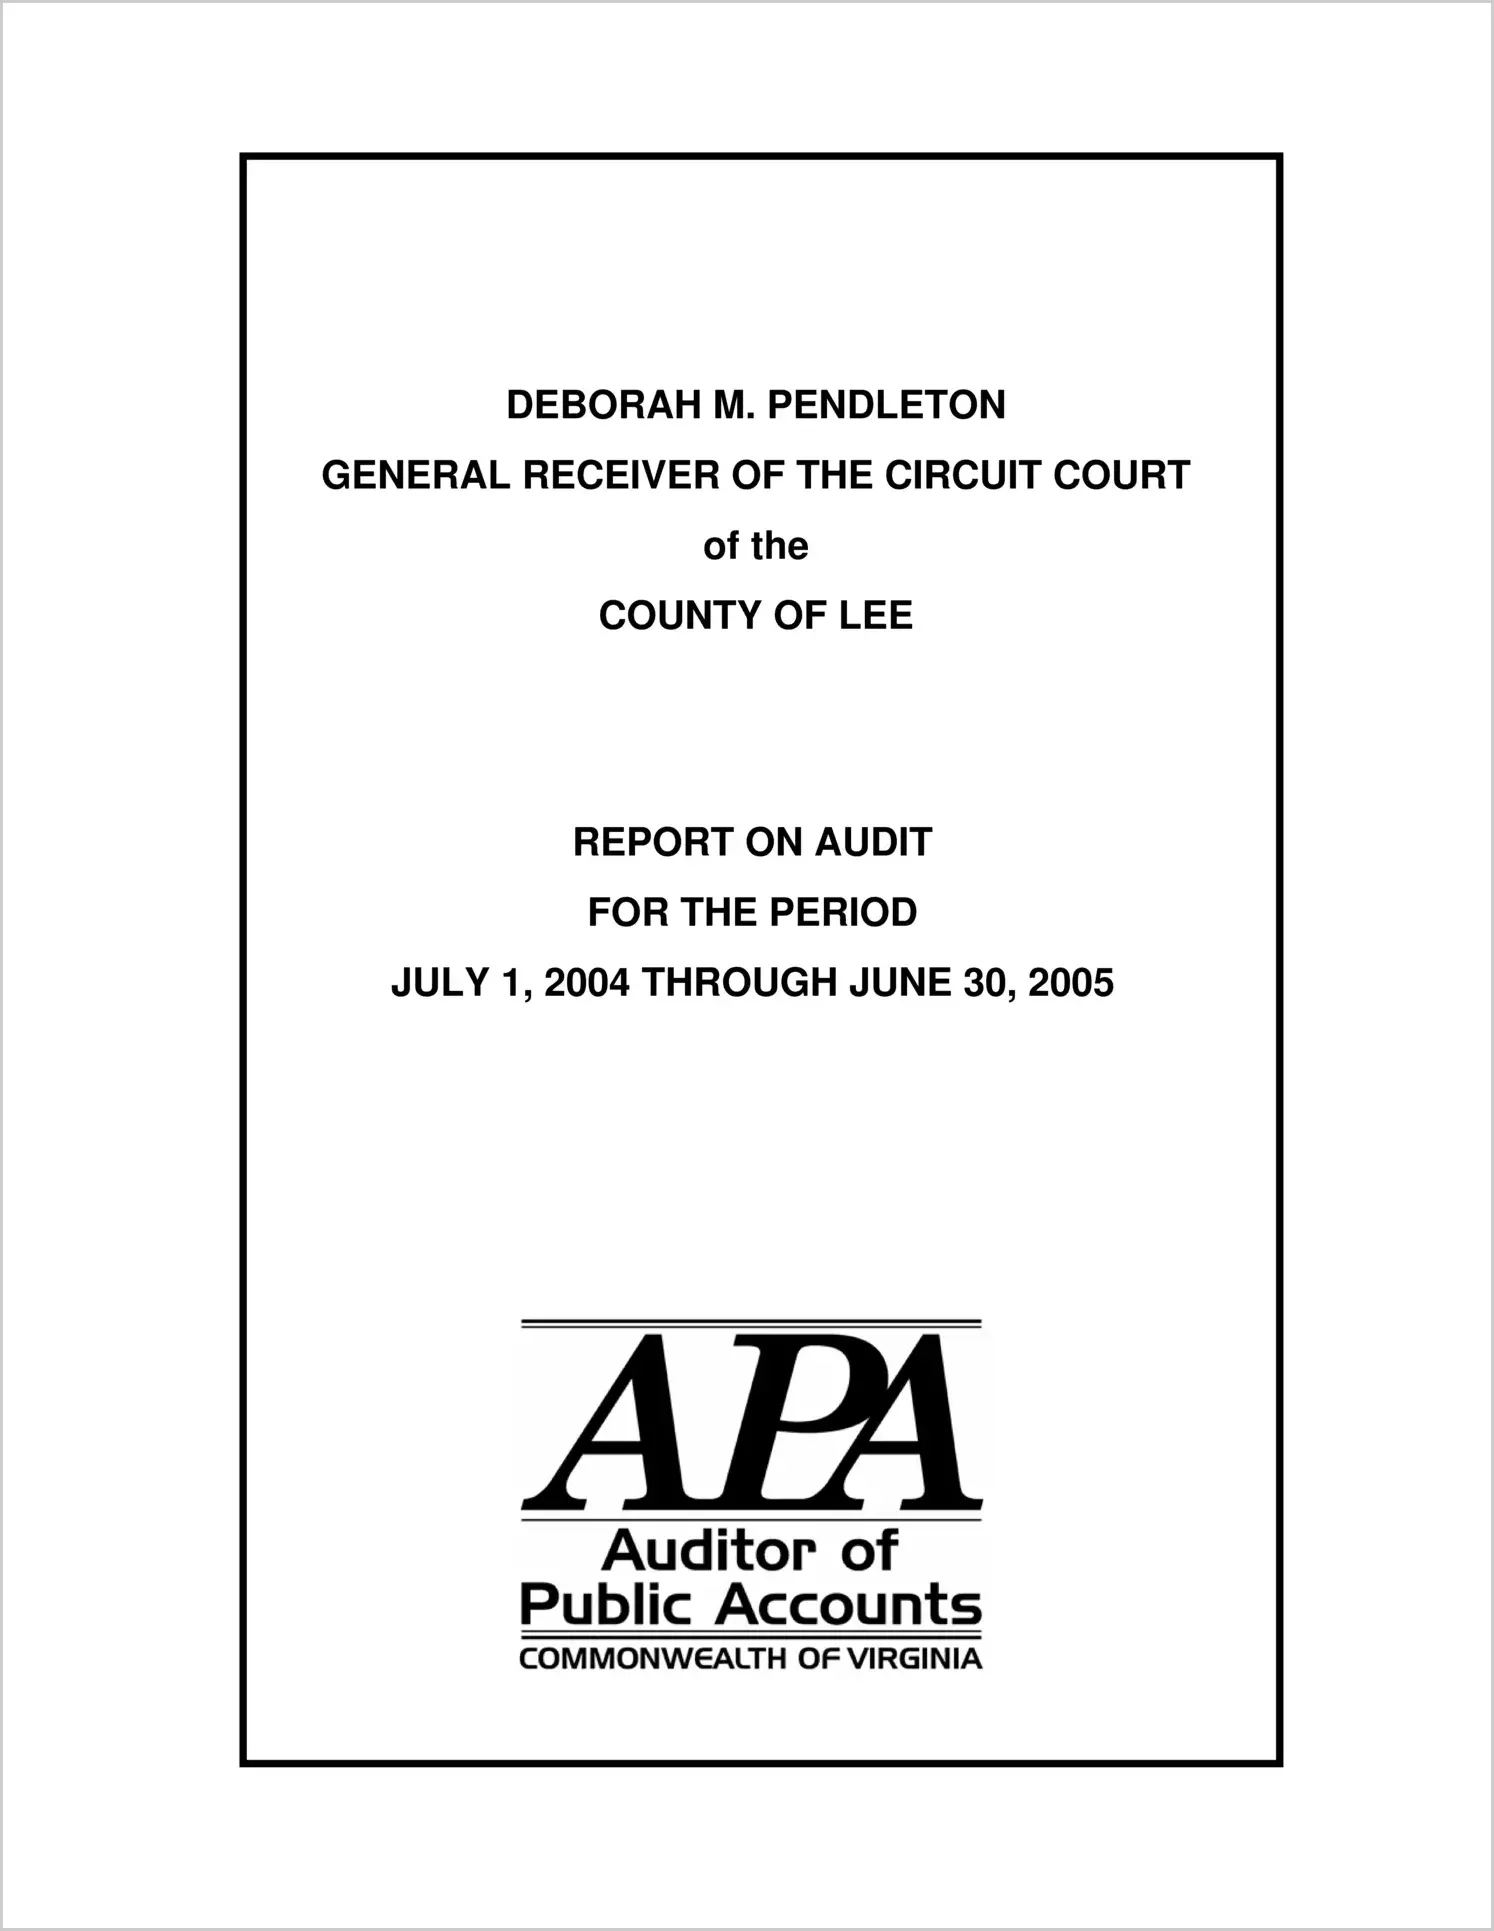 General Receiver of the Circuit Court of the County of Lee for the period July 1, 2004 through June 30, 2005